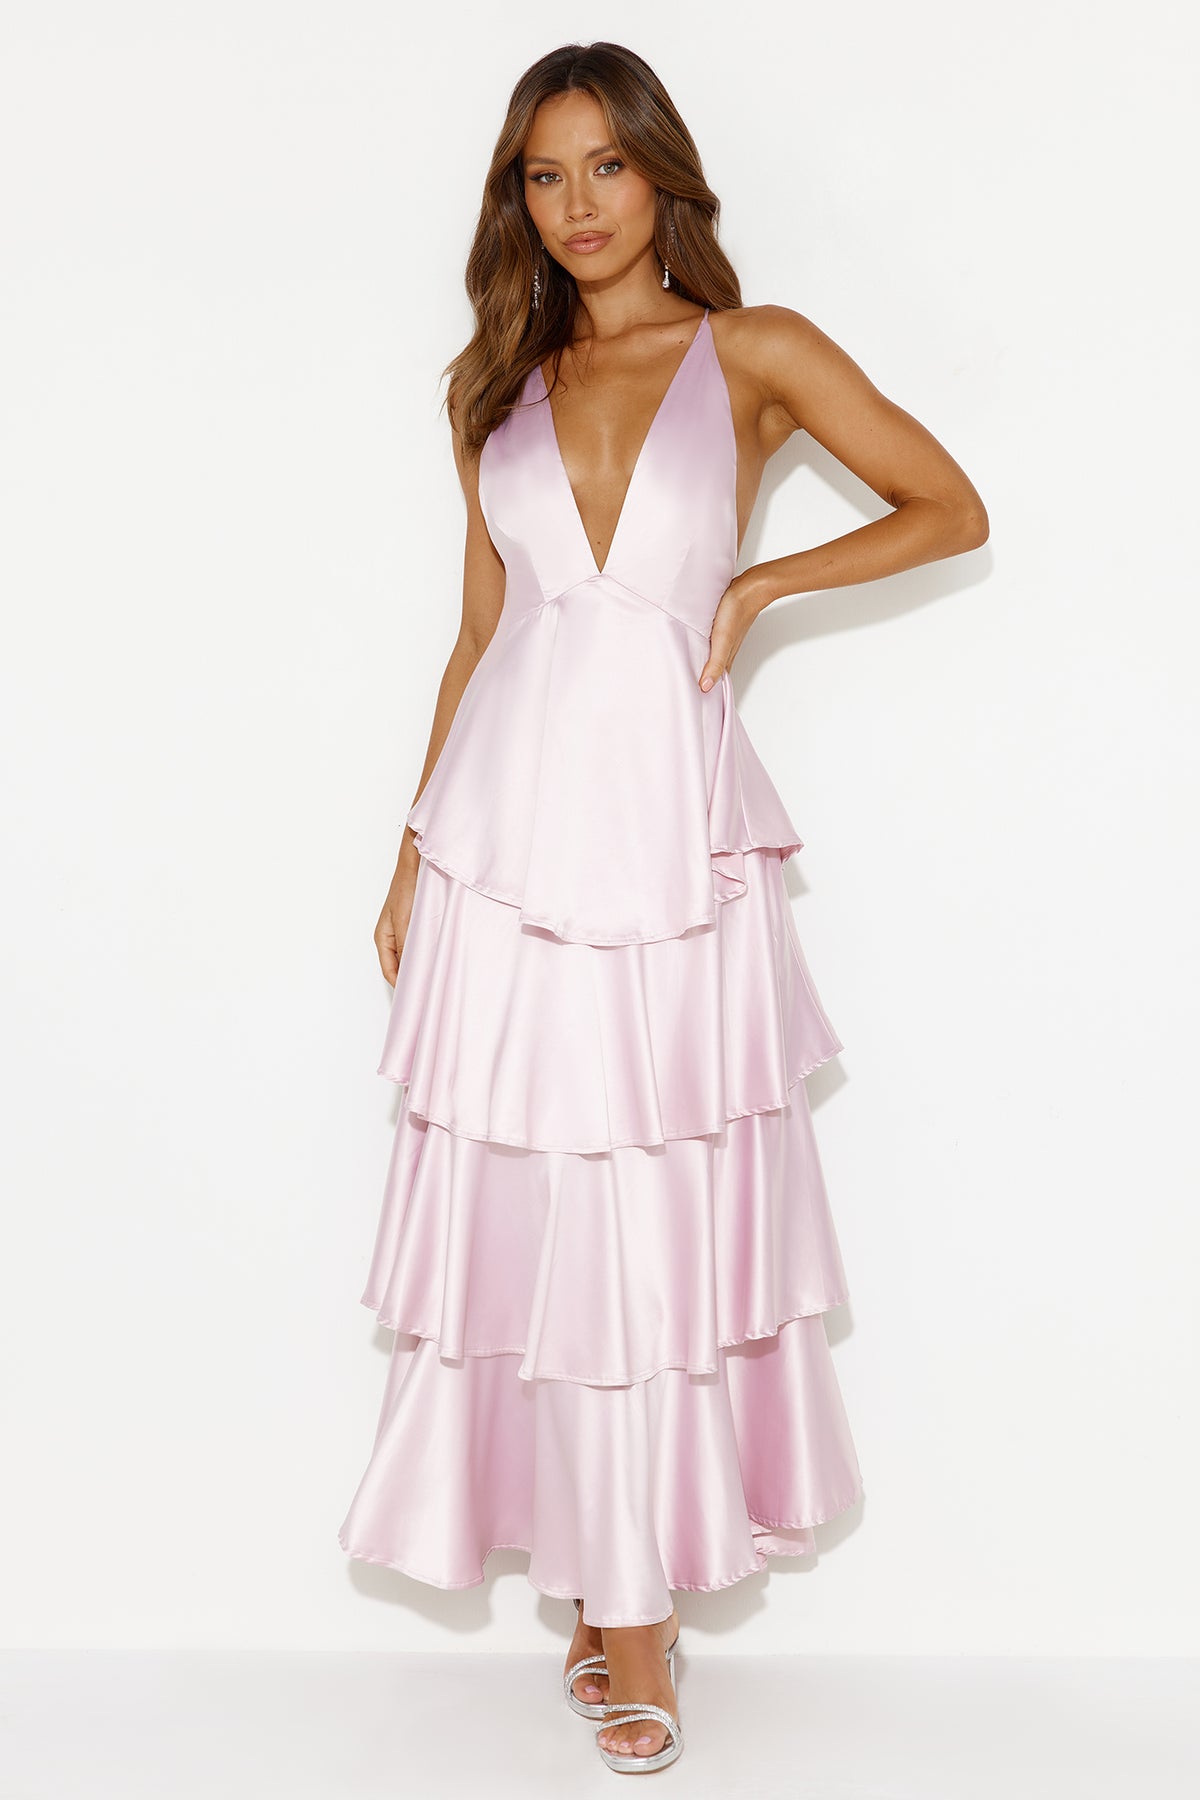 Shop Formal Dress - Party Of The Year Satin Maxi Dress Light Pink fifth image